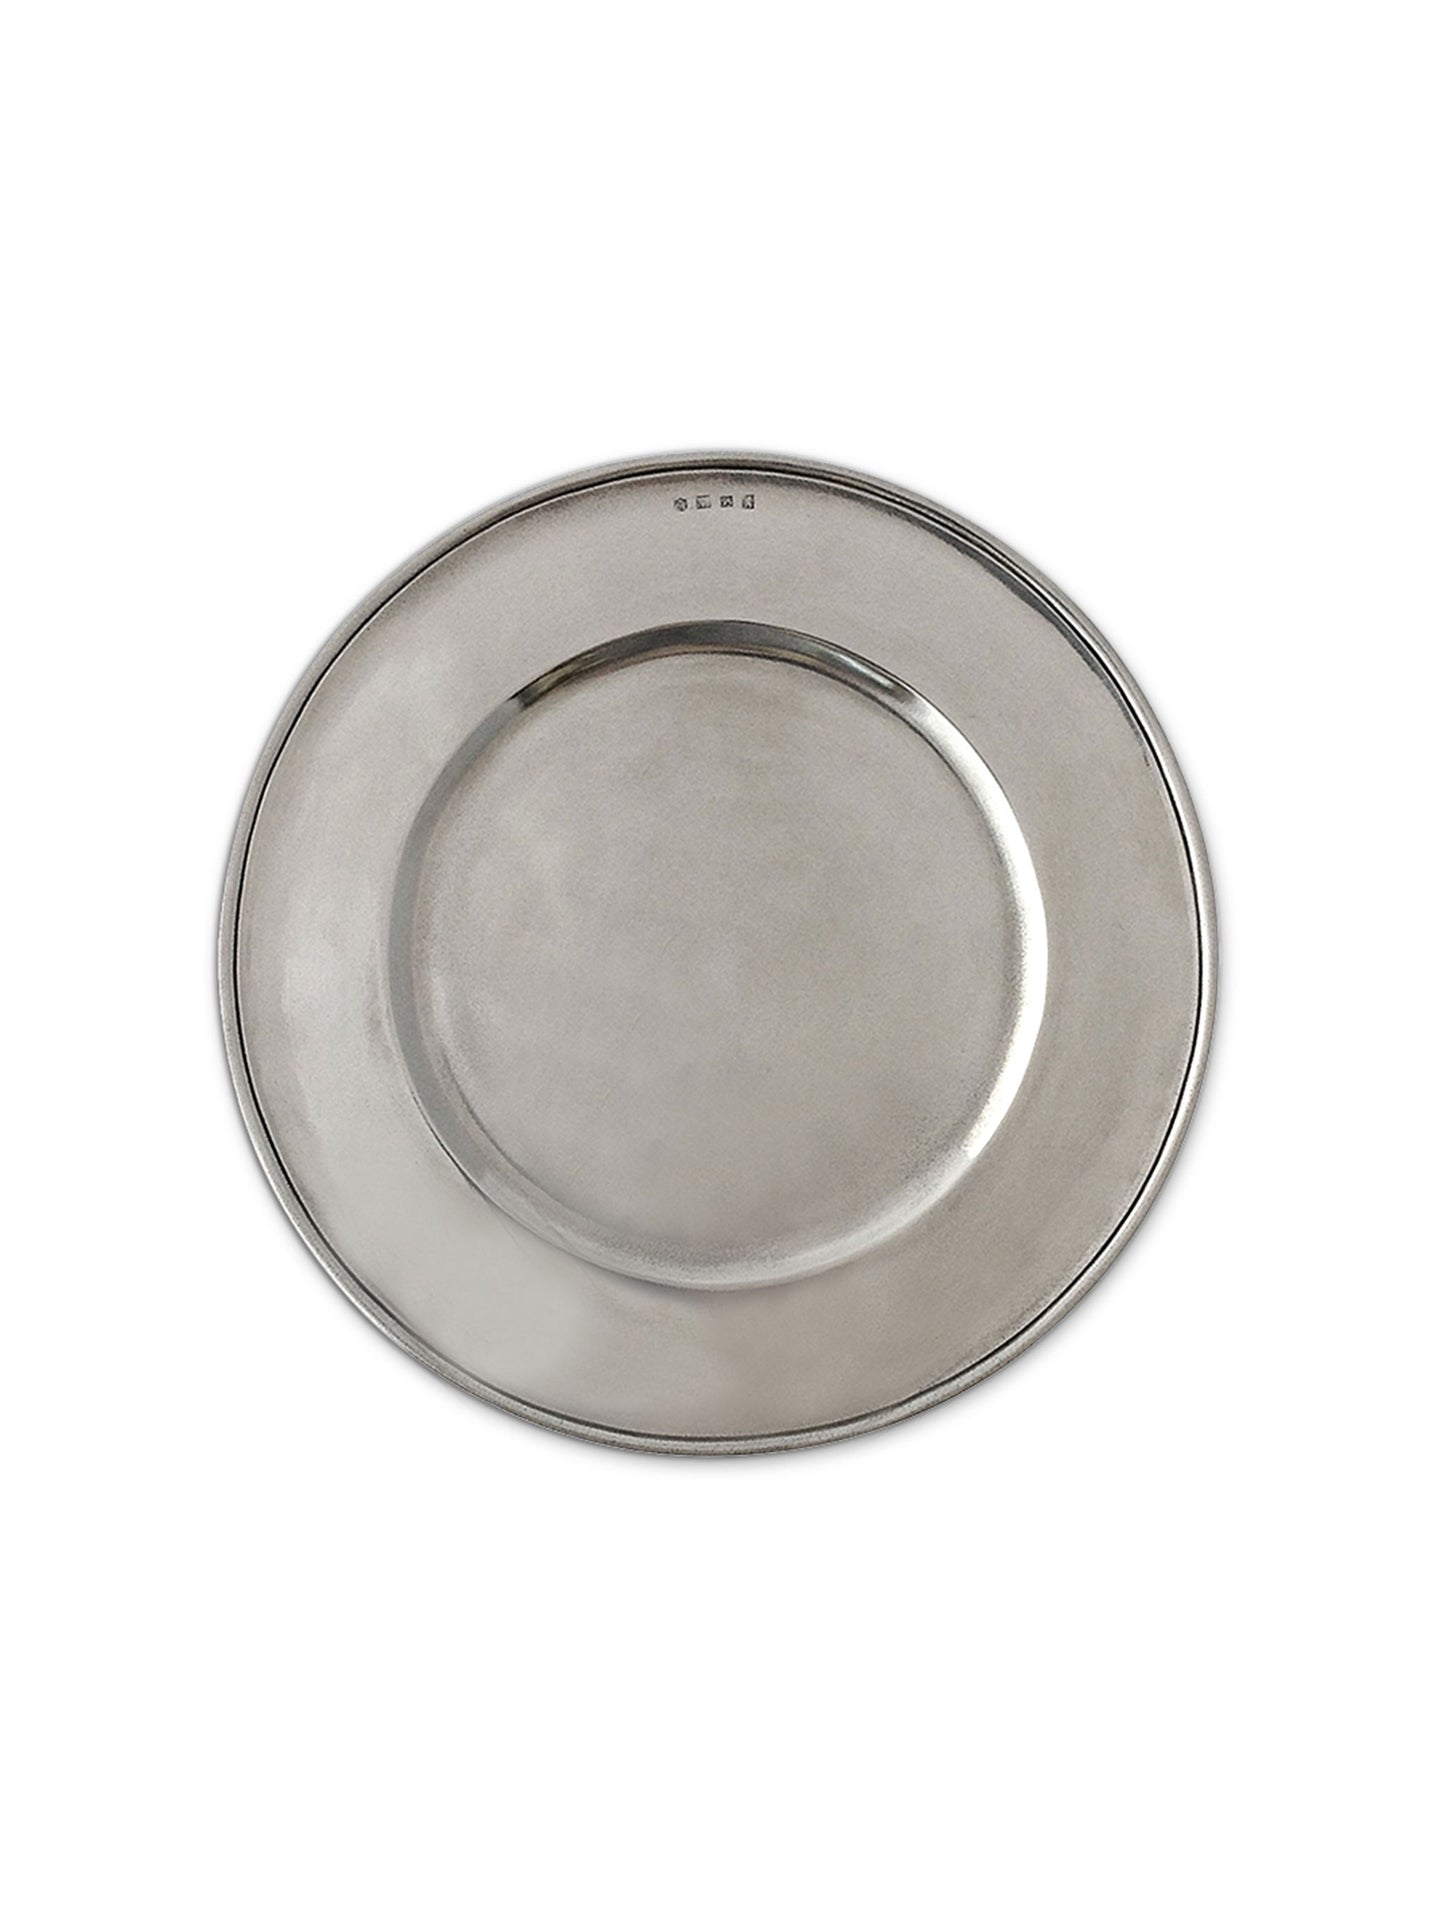 MATCH Pewter Convivio Charger Weston Table